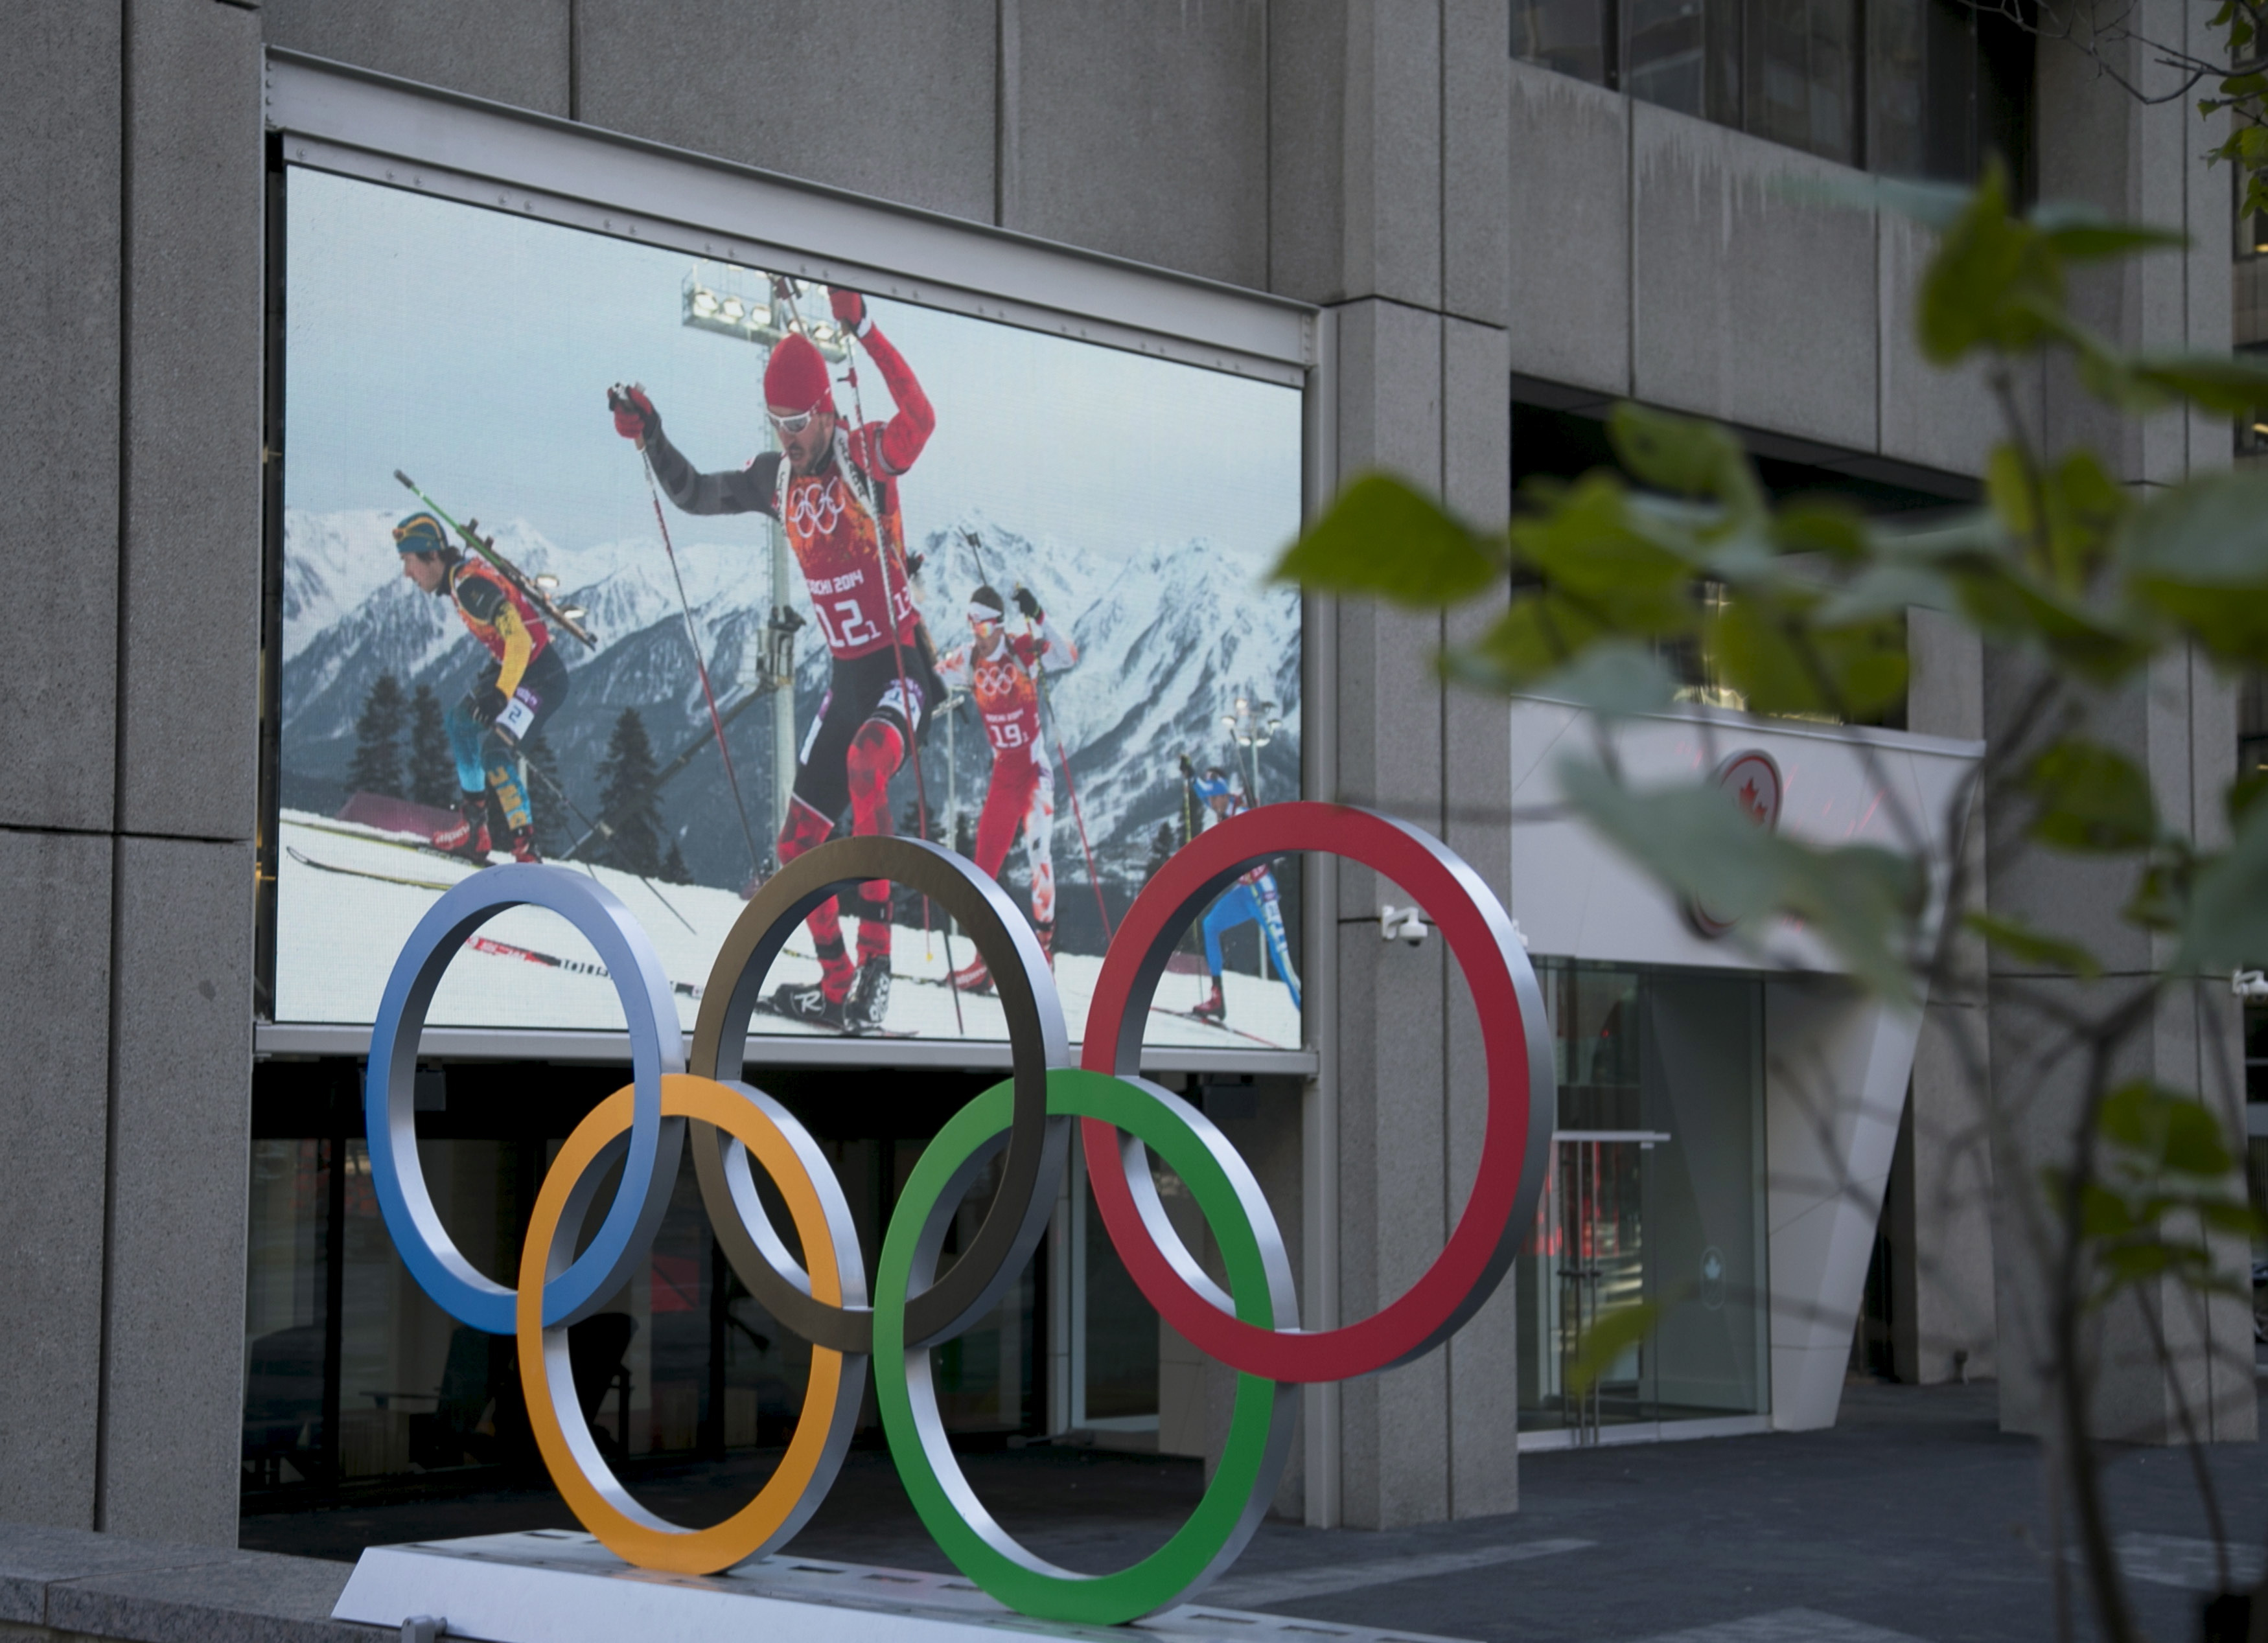 The Olympic rings seen displayed outside the headquarters for the Canadian Olympic Committee (COC) in Montreal